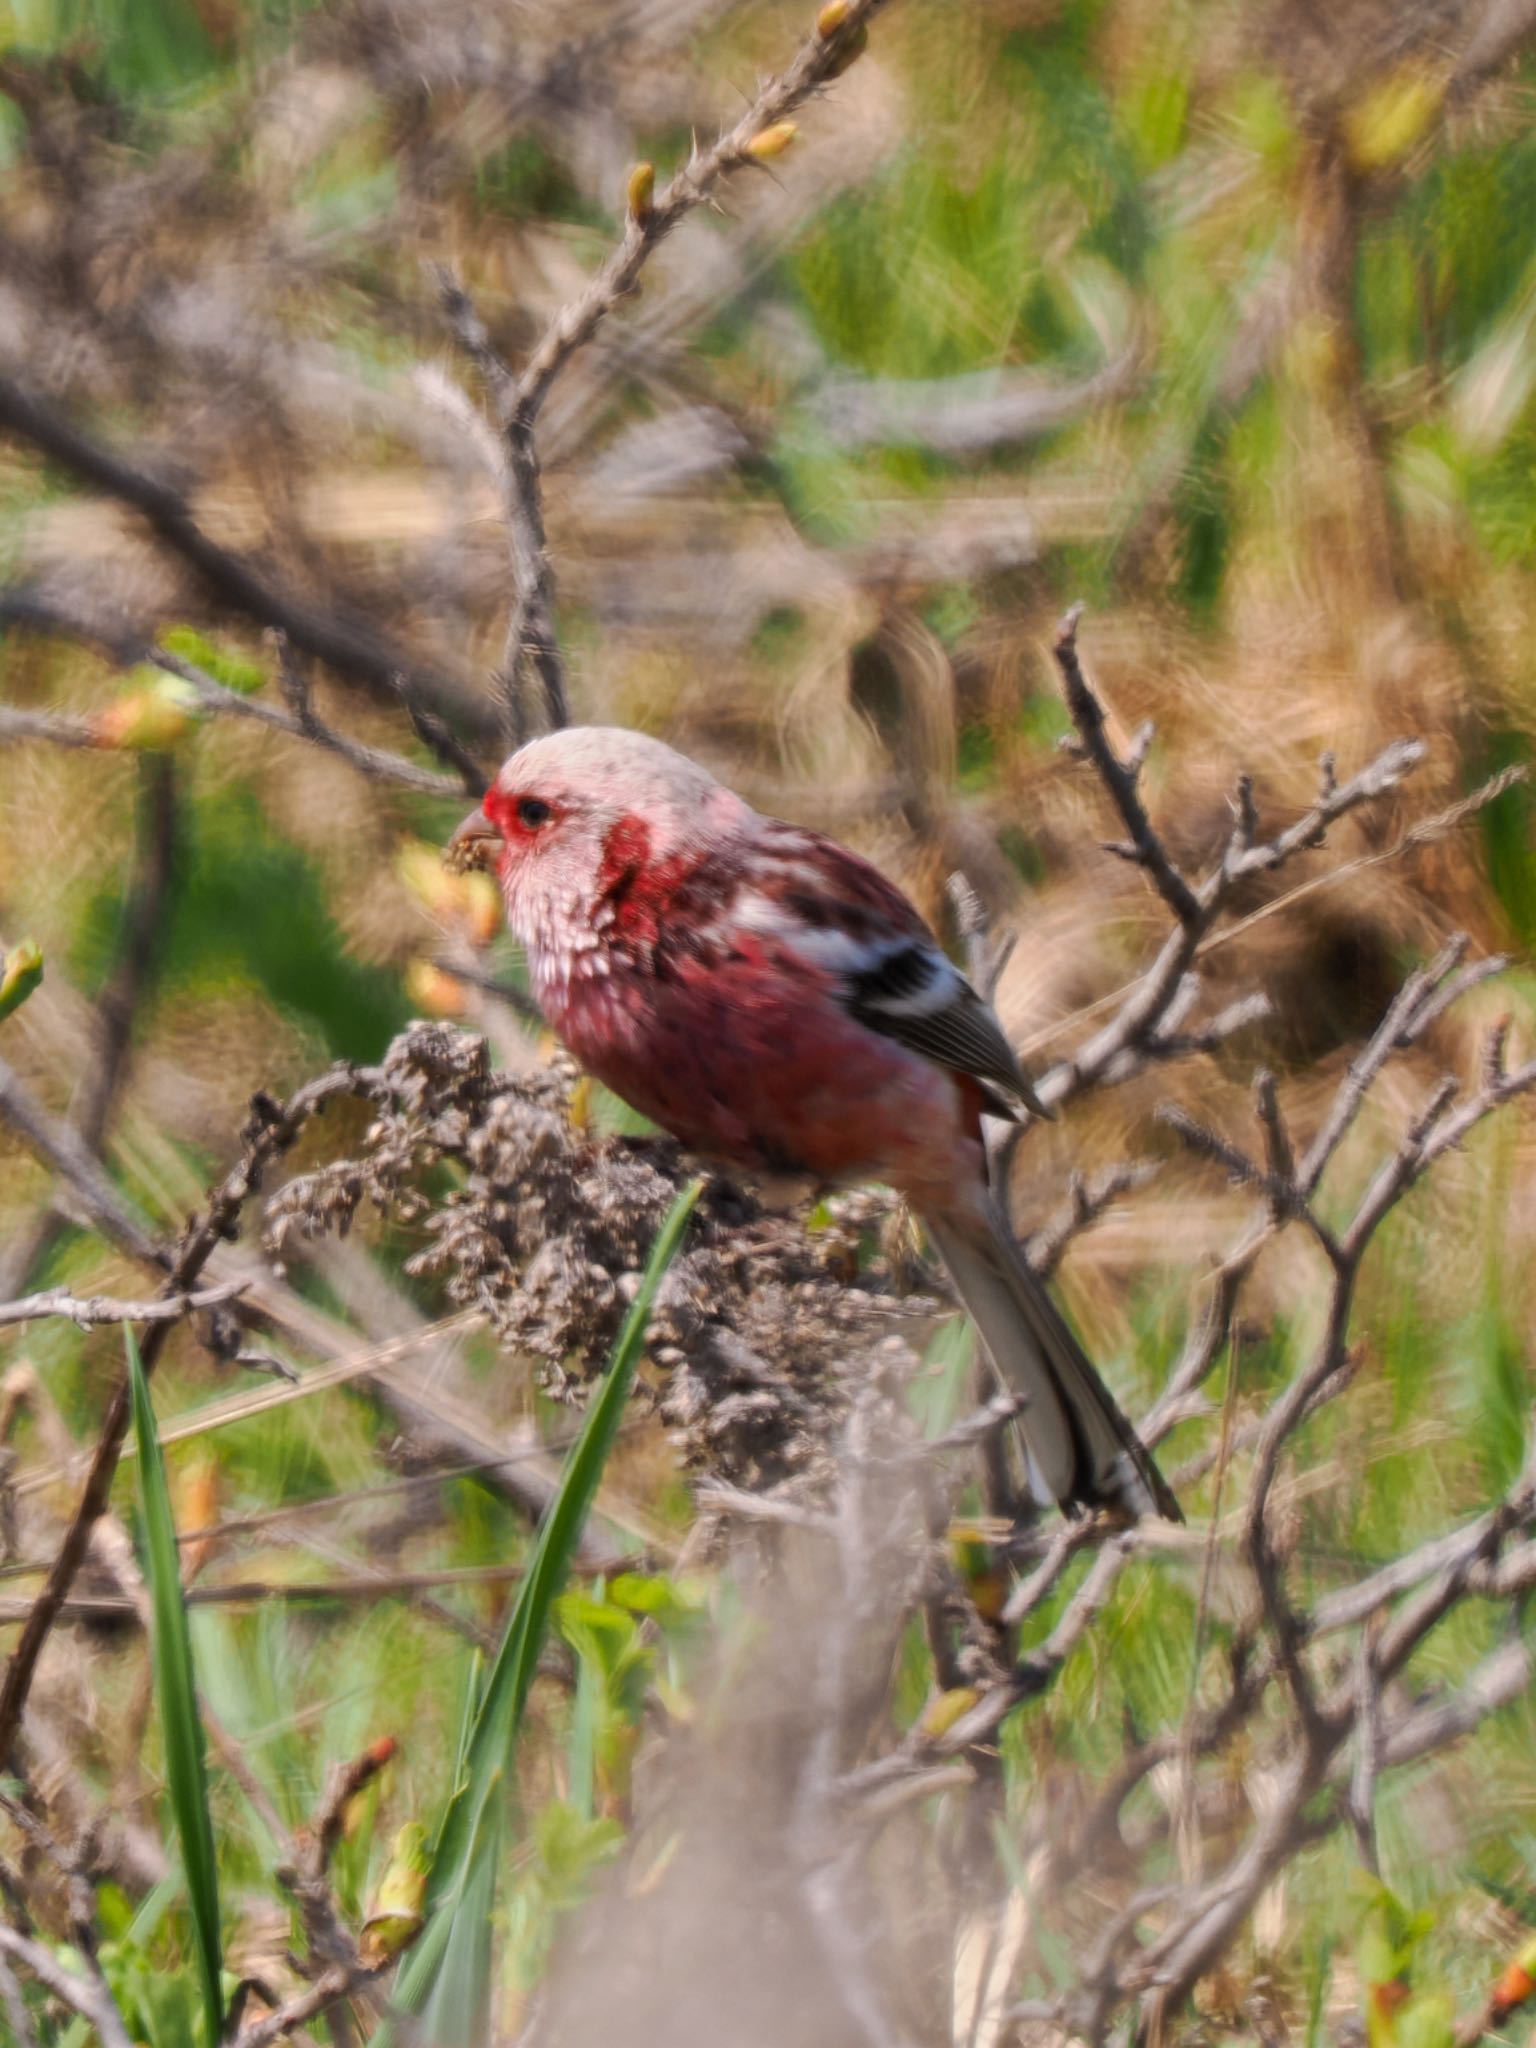 Photo of Siberian Long-tailed Rosefinch at シブノツナイ湖 by daffy@お散歩探鳥＆遠征探鳥♪